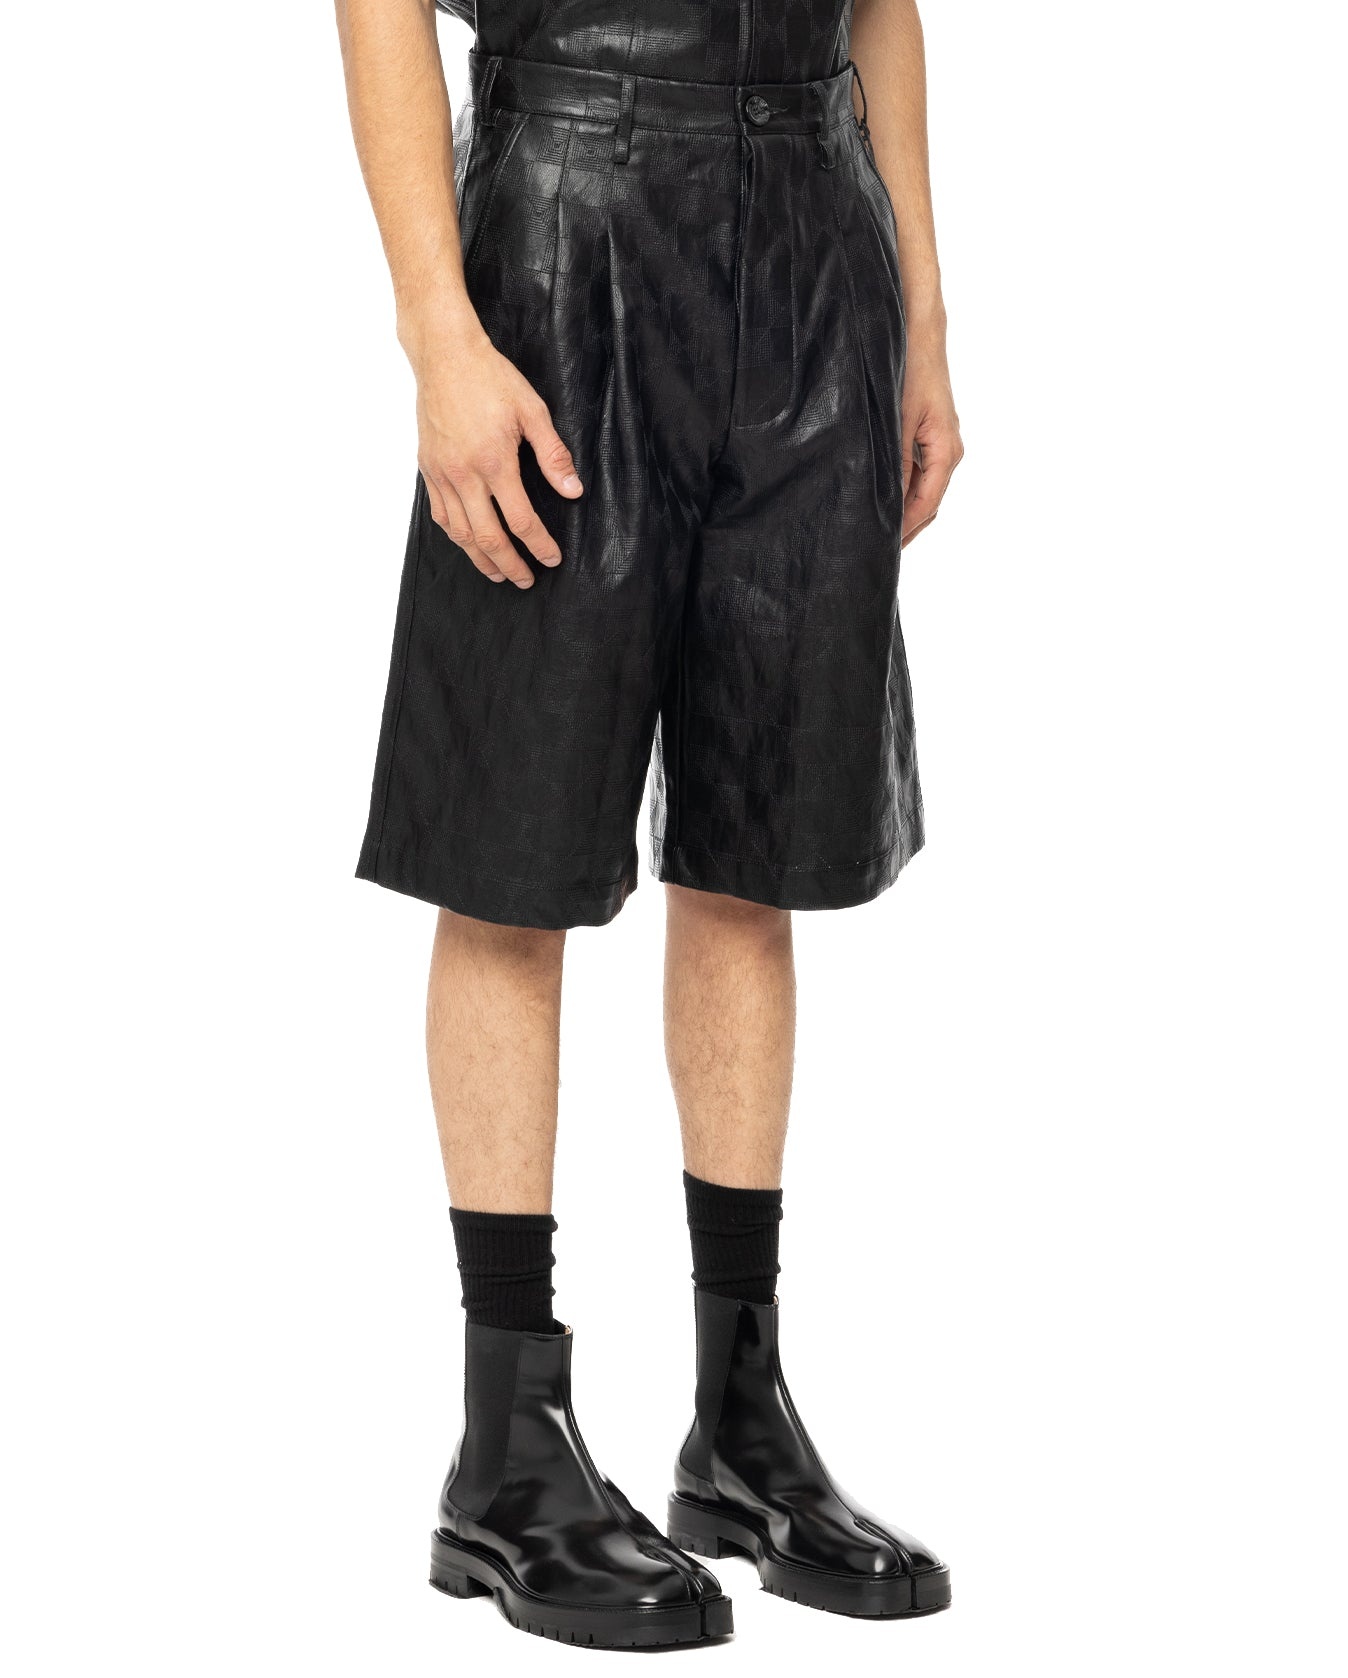 Embroidered Leather Single Pleated Shorts - Black - 3